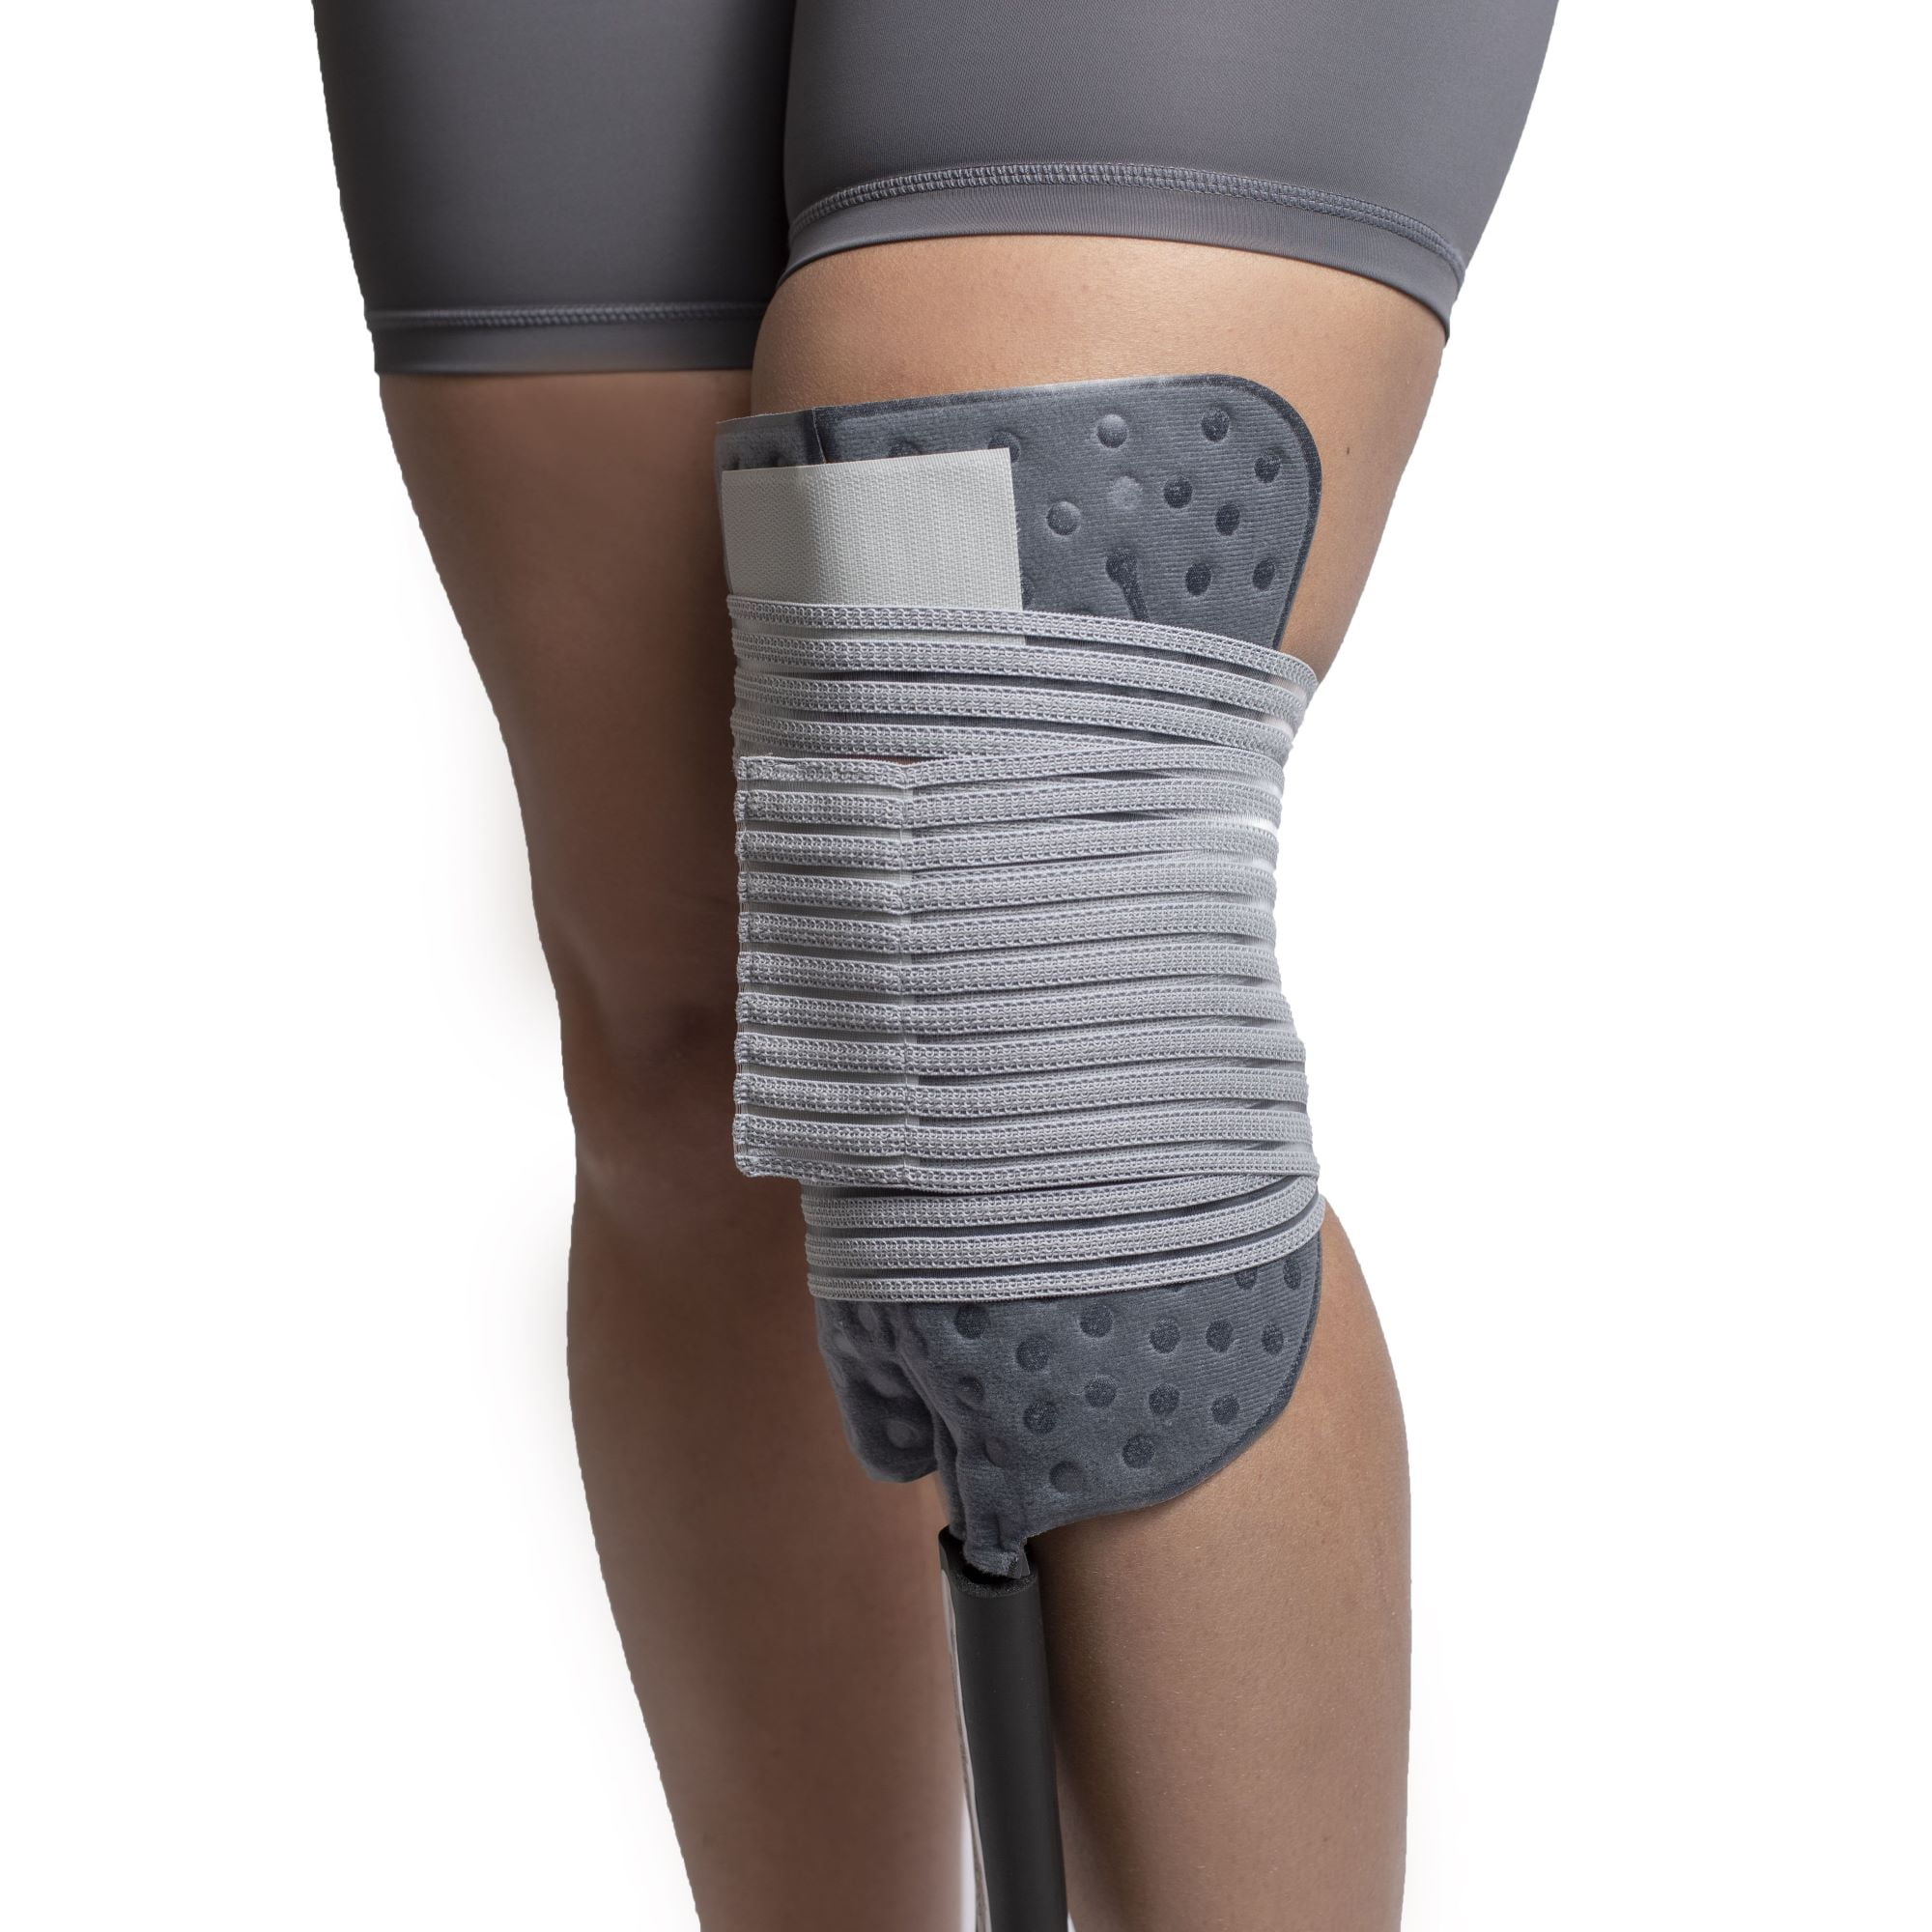 Brace Direct Frozen Ice Cold Therapy Machine for Joint Pain, Sore Muscles,  and Tendonitis